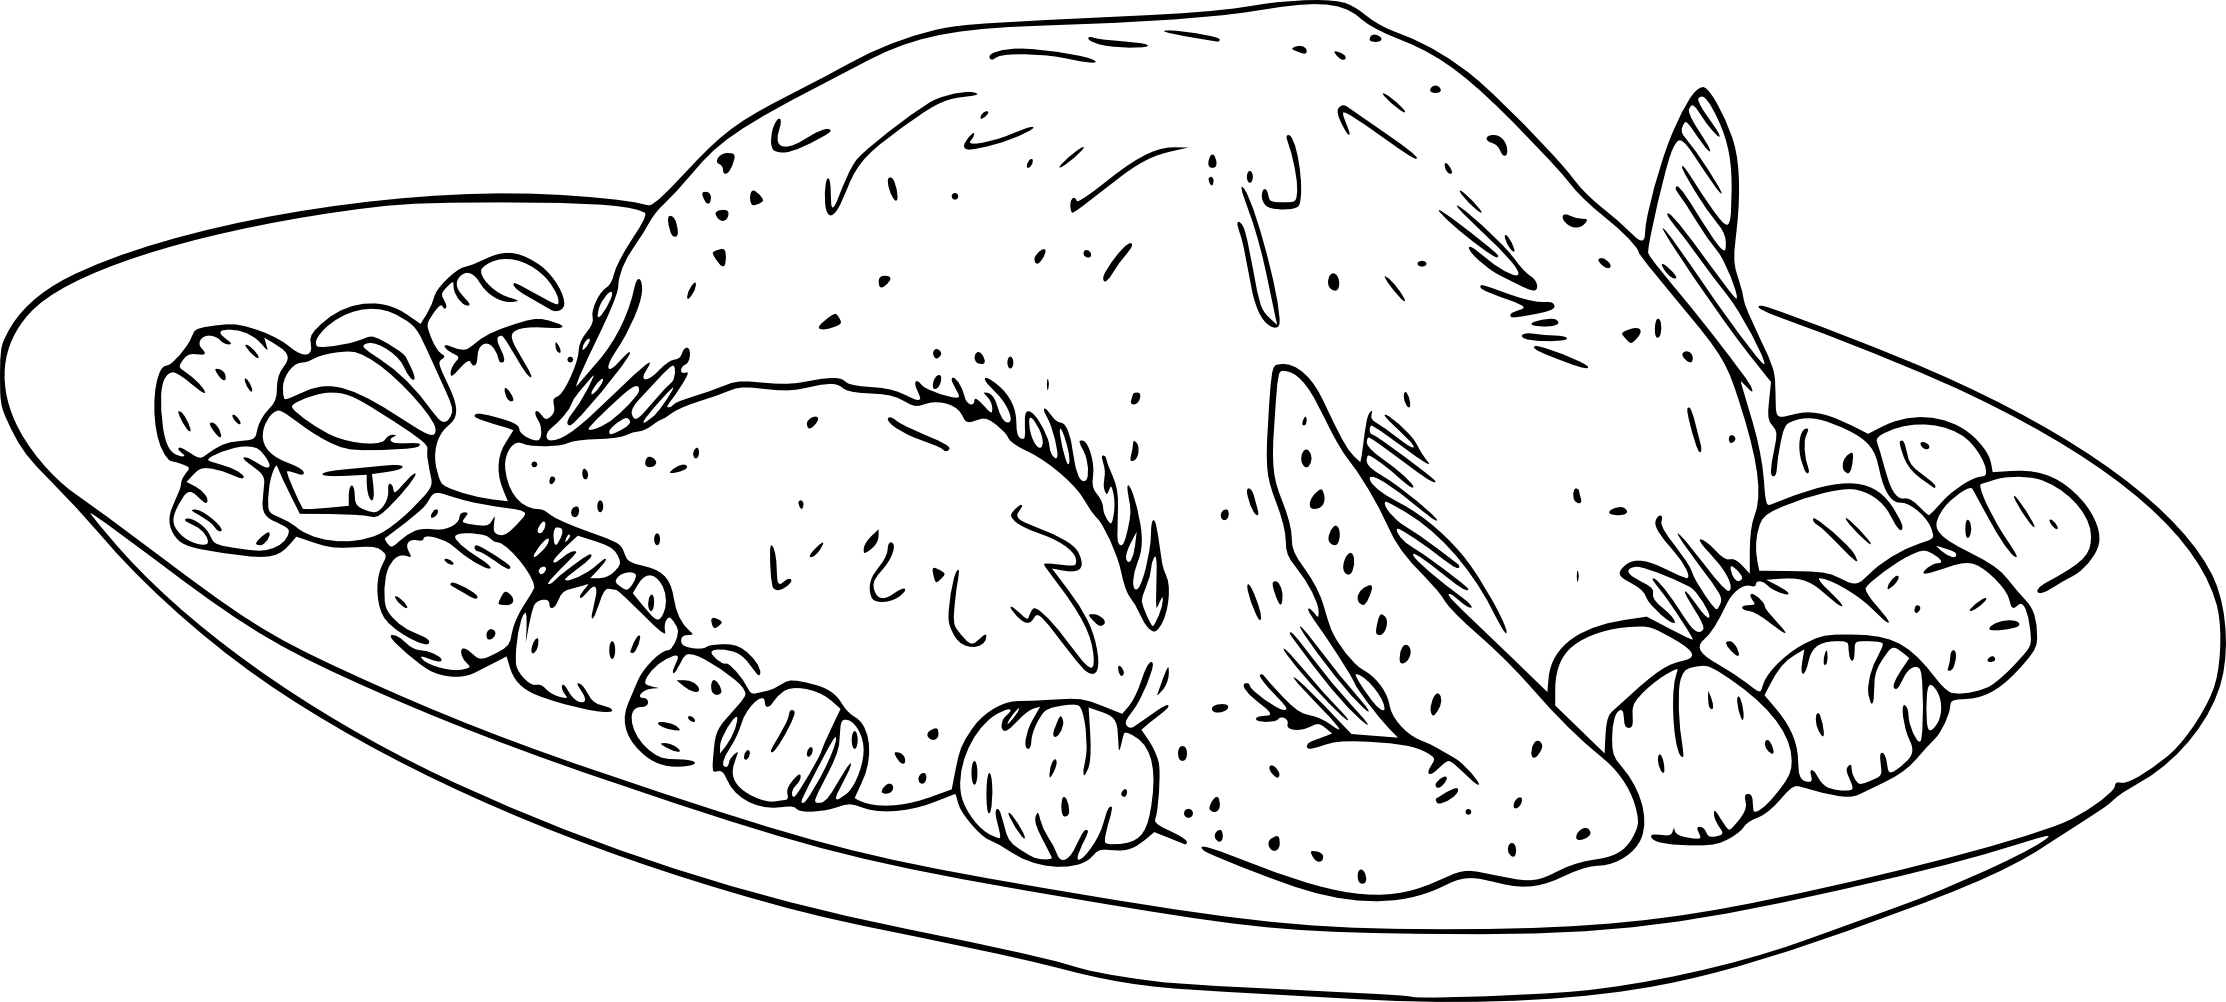 Turkey Dinner coloring page